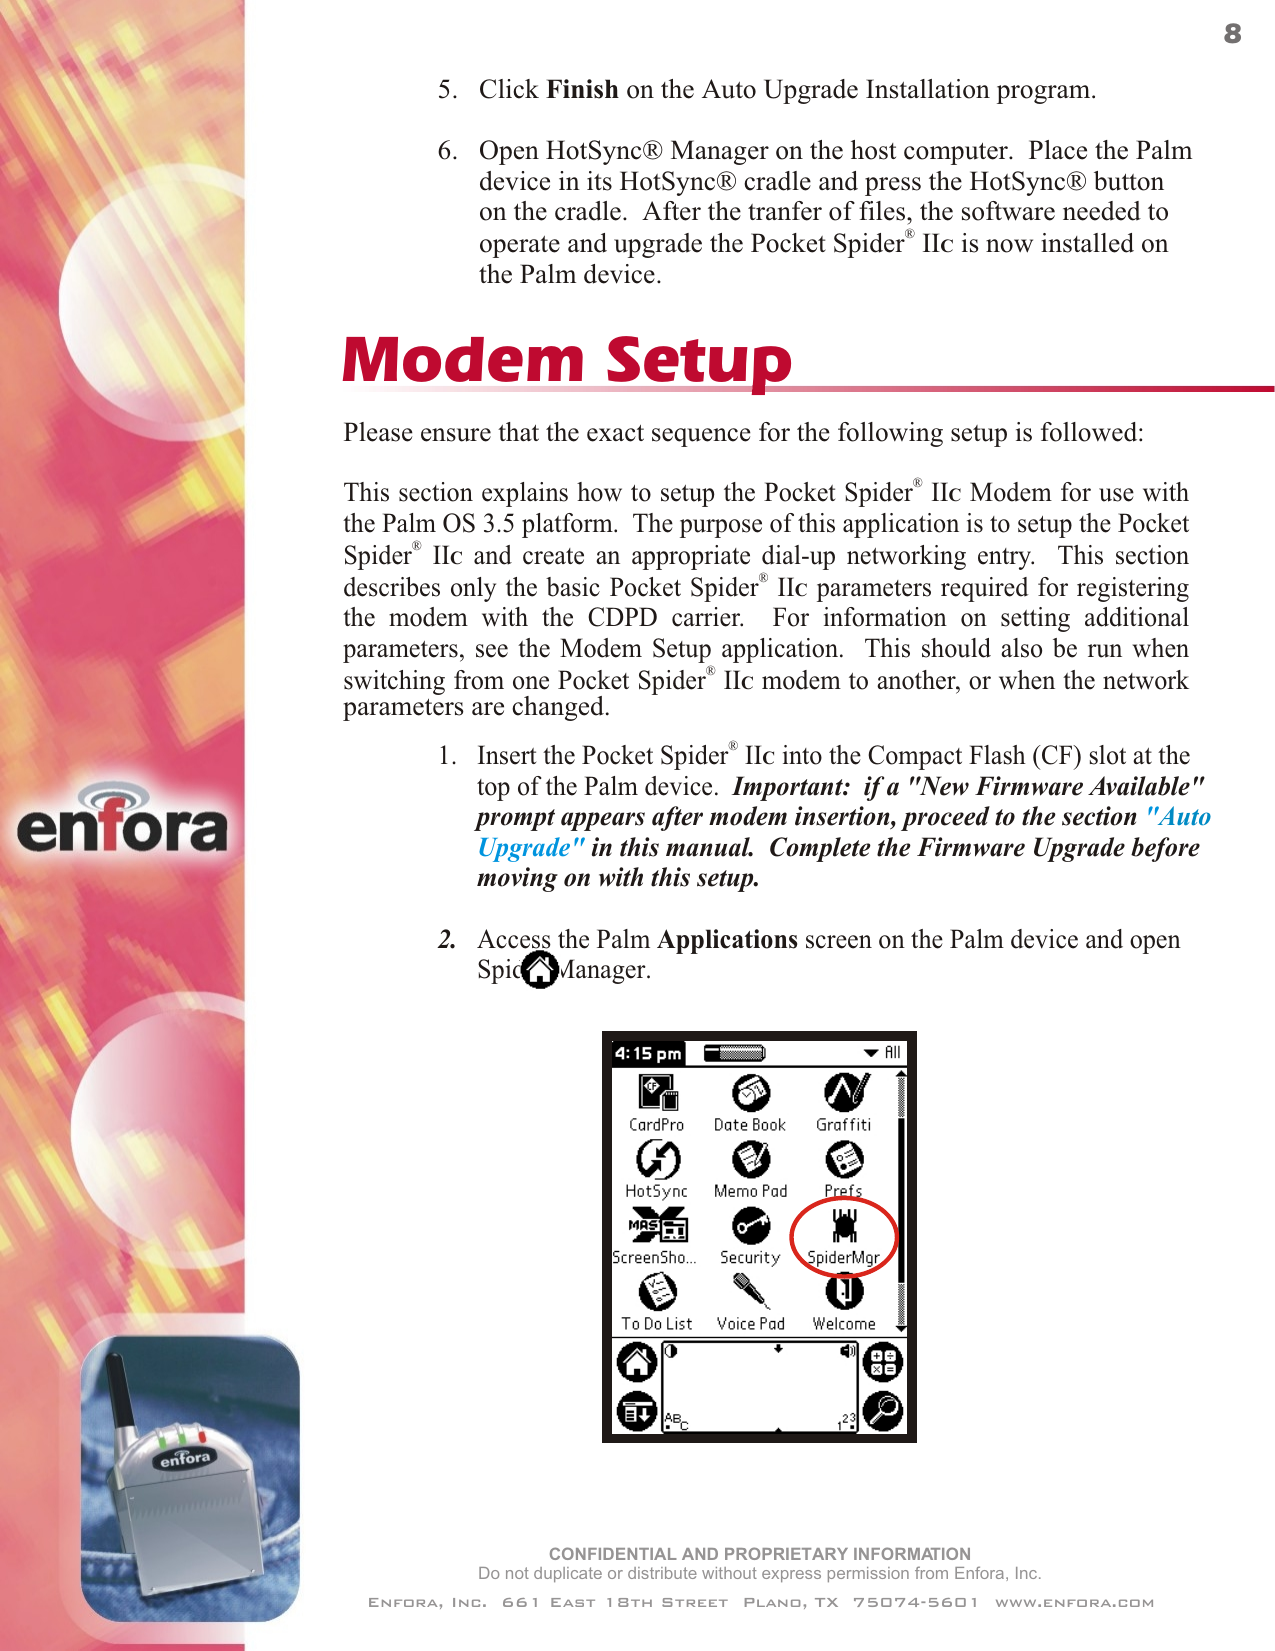 ®1.   Insert the Pocket Spider  IIC into the Compact Flash (CF) slot at the      top of the Palm device.  Important:  if a &quot;New Firmware Available&quot;      prompt appears after modem insertion, proceed to the section  in this manual.  Complete the Firmware Upgrade before      moving on with this setup.2.   Access the Palm Applications screen on the Palm device and open      Spider Manager. &quot;Upgrade&quot;Auto      Please ensure that the exact sequence for the following setup is followed:This section explains how to setup the   Modem for use withthe Palm OS 3.5 platform.  The purpose of this application is to setup the  and create an appropriate dial-up networking entry.  This sectiondescribes only the basic   parameters required for registeringthe modem with the CDPD carrier.  For information on setting additionalparameters, see the Modem Setup application.  This should also be run whenswitching from one   modem to another, or when the network®Pocket Spider  IICPocket®Spider  IIC®Pocket Spider  IIC®Pocket Spider  IICModem Setupparameters are changed.5.   Click Finish on the Auto Upgrade Installation program.6.   Open HotSync® Manager on the host computer.  Place the Palm      device in its HotSync® cradle and press the HotSync® button      on the cradle.  After the tranfer of files, the software needed to®      operate and upgrade the Pocket Spider  IIC is now installed on      the Palm device.CONFIDENTIAL AND PROPRIETARY INFORMATIONDo not duplicate or distribute without express permission from Enfora, Inc.Enfora, Inc.  661 East 18th Street  Plano, TX  75074-5601  www.enfora.com8